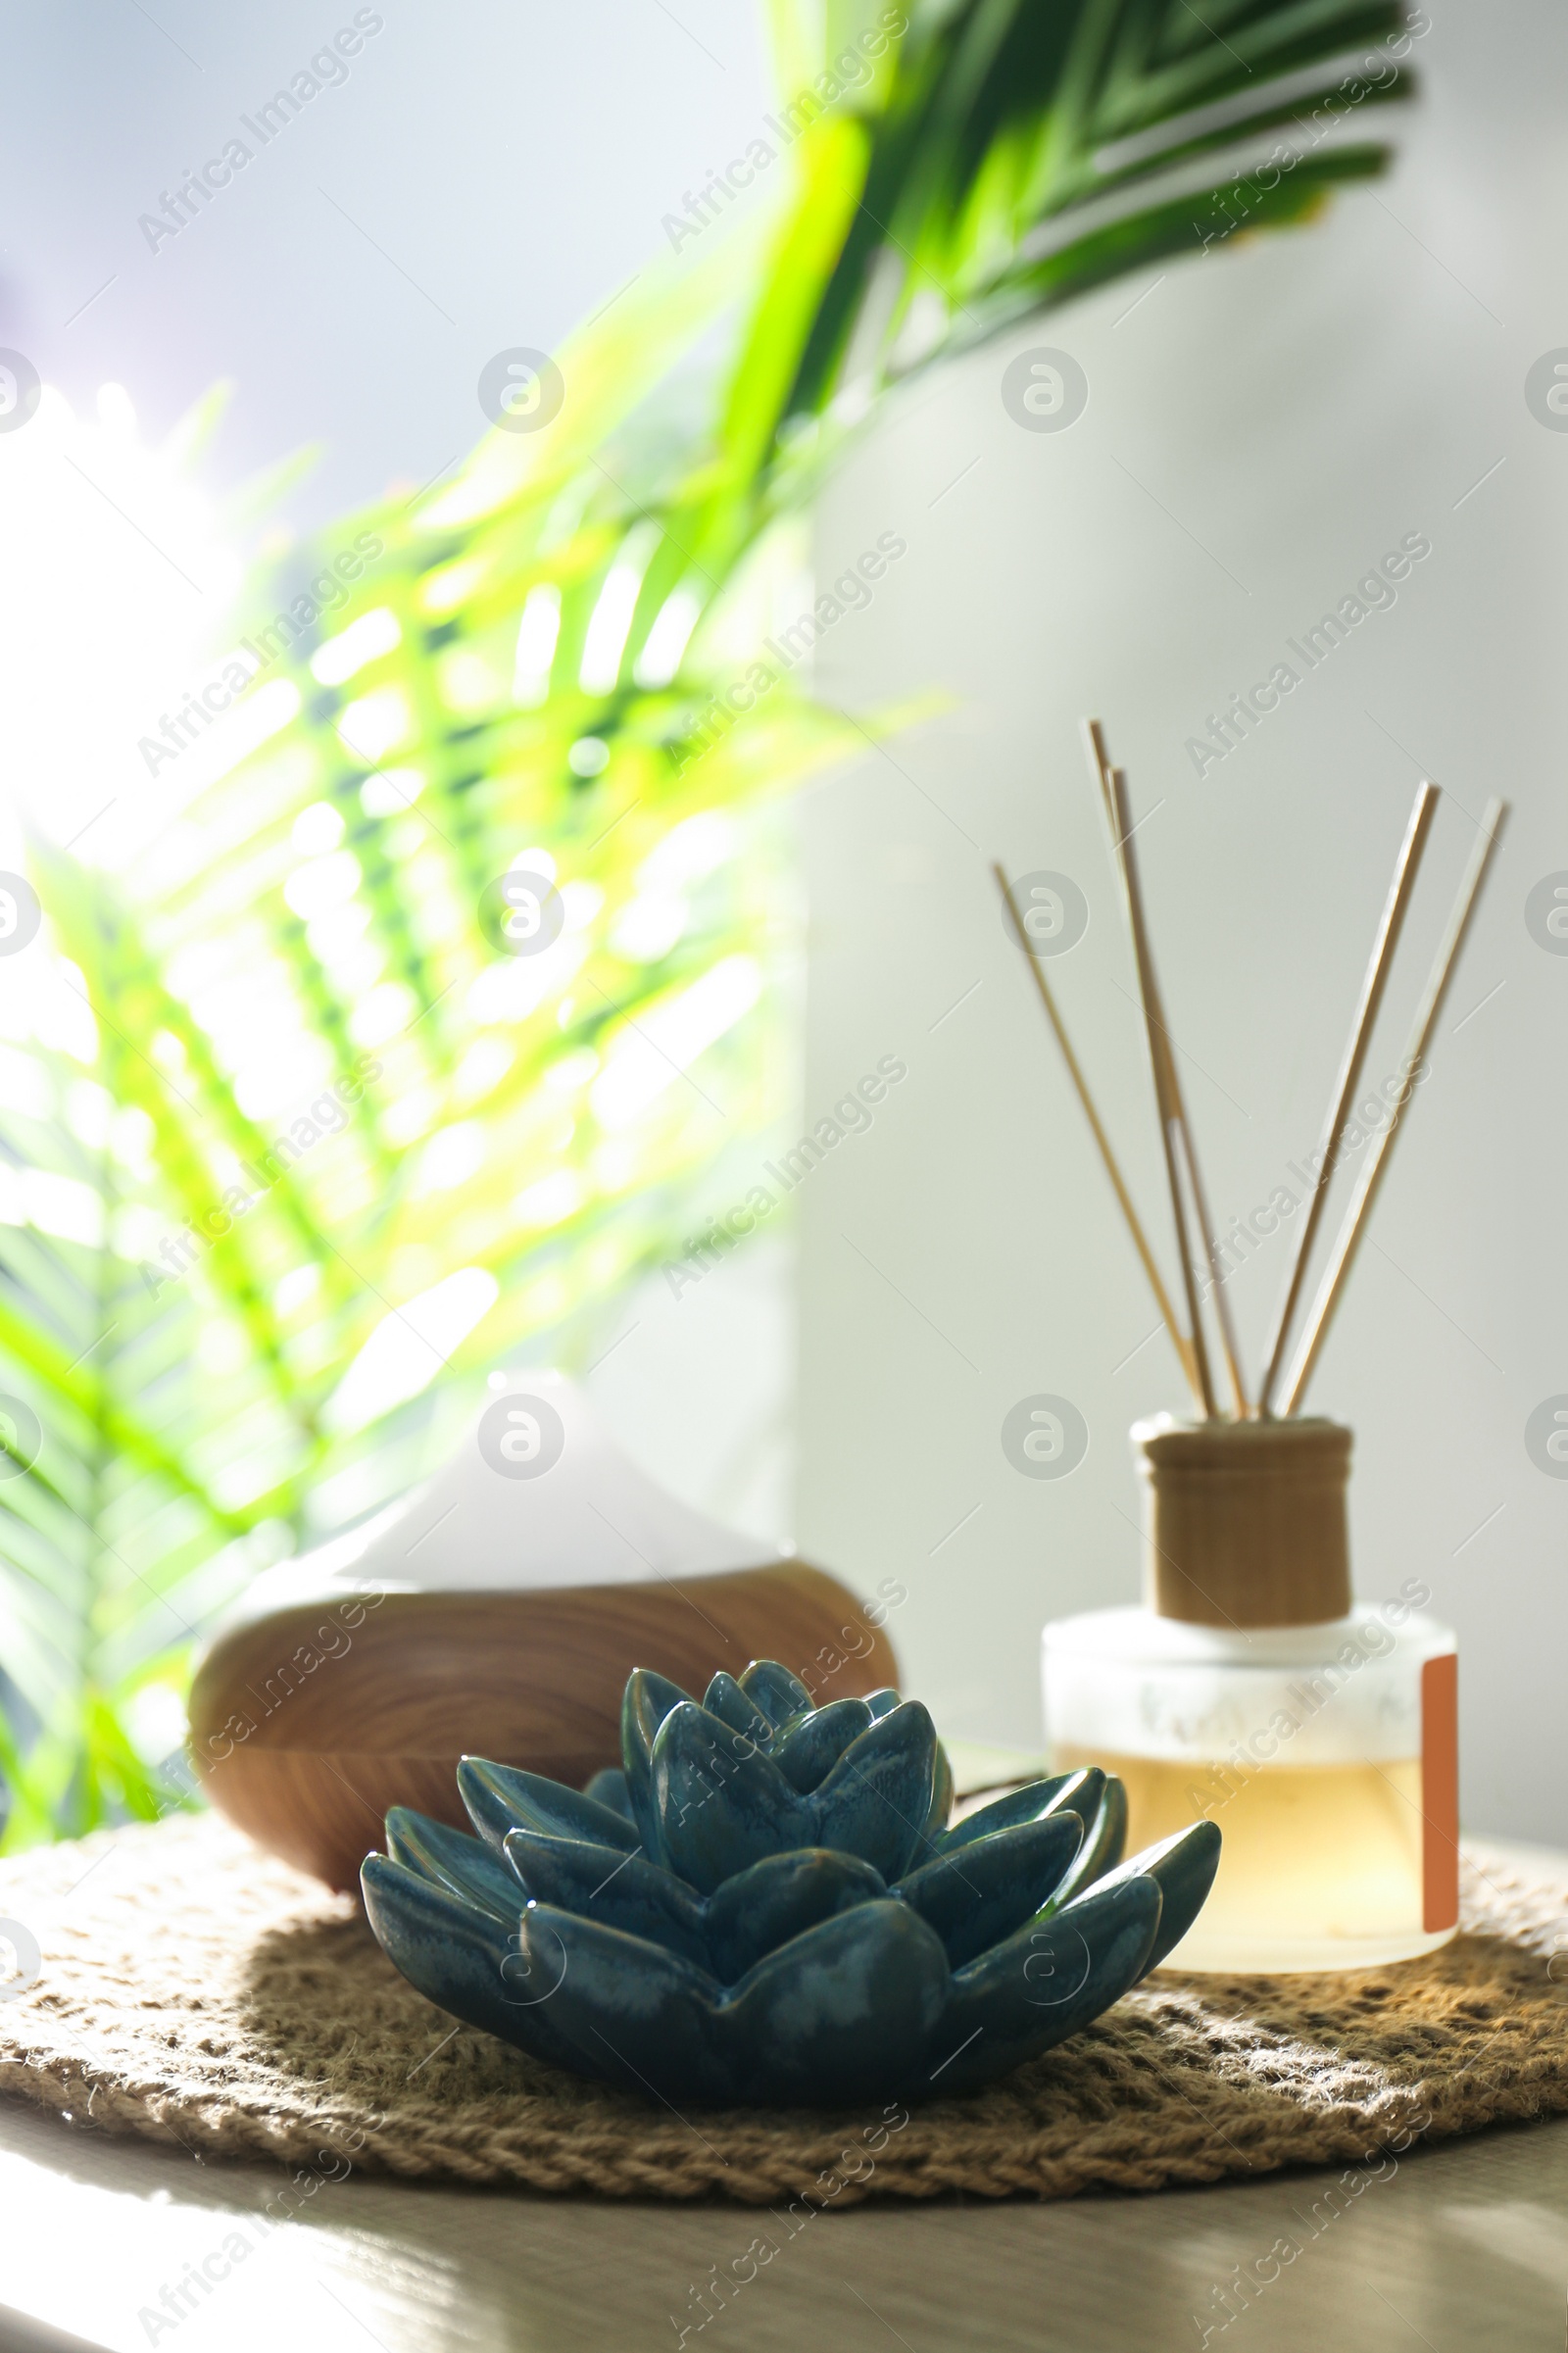 Photo of Aroma oil diffuser and reed air freshener on table in room